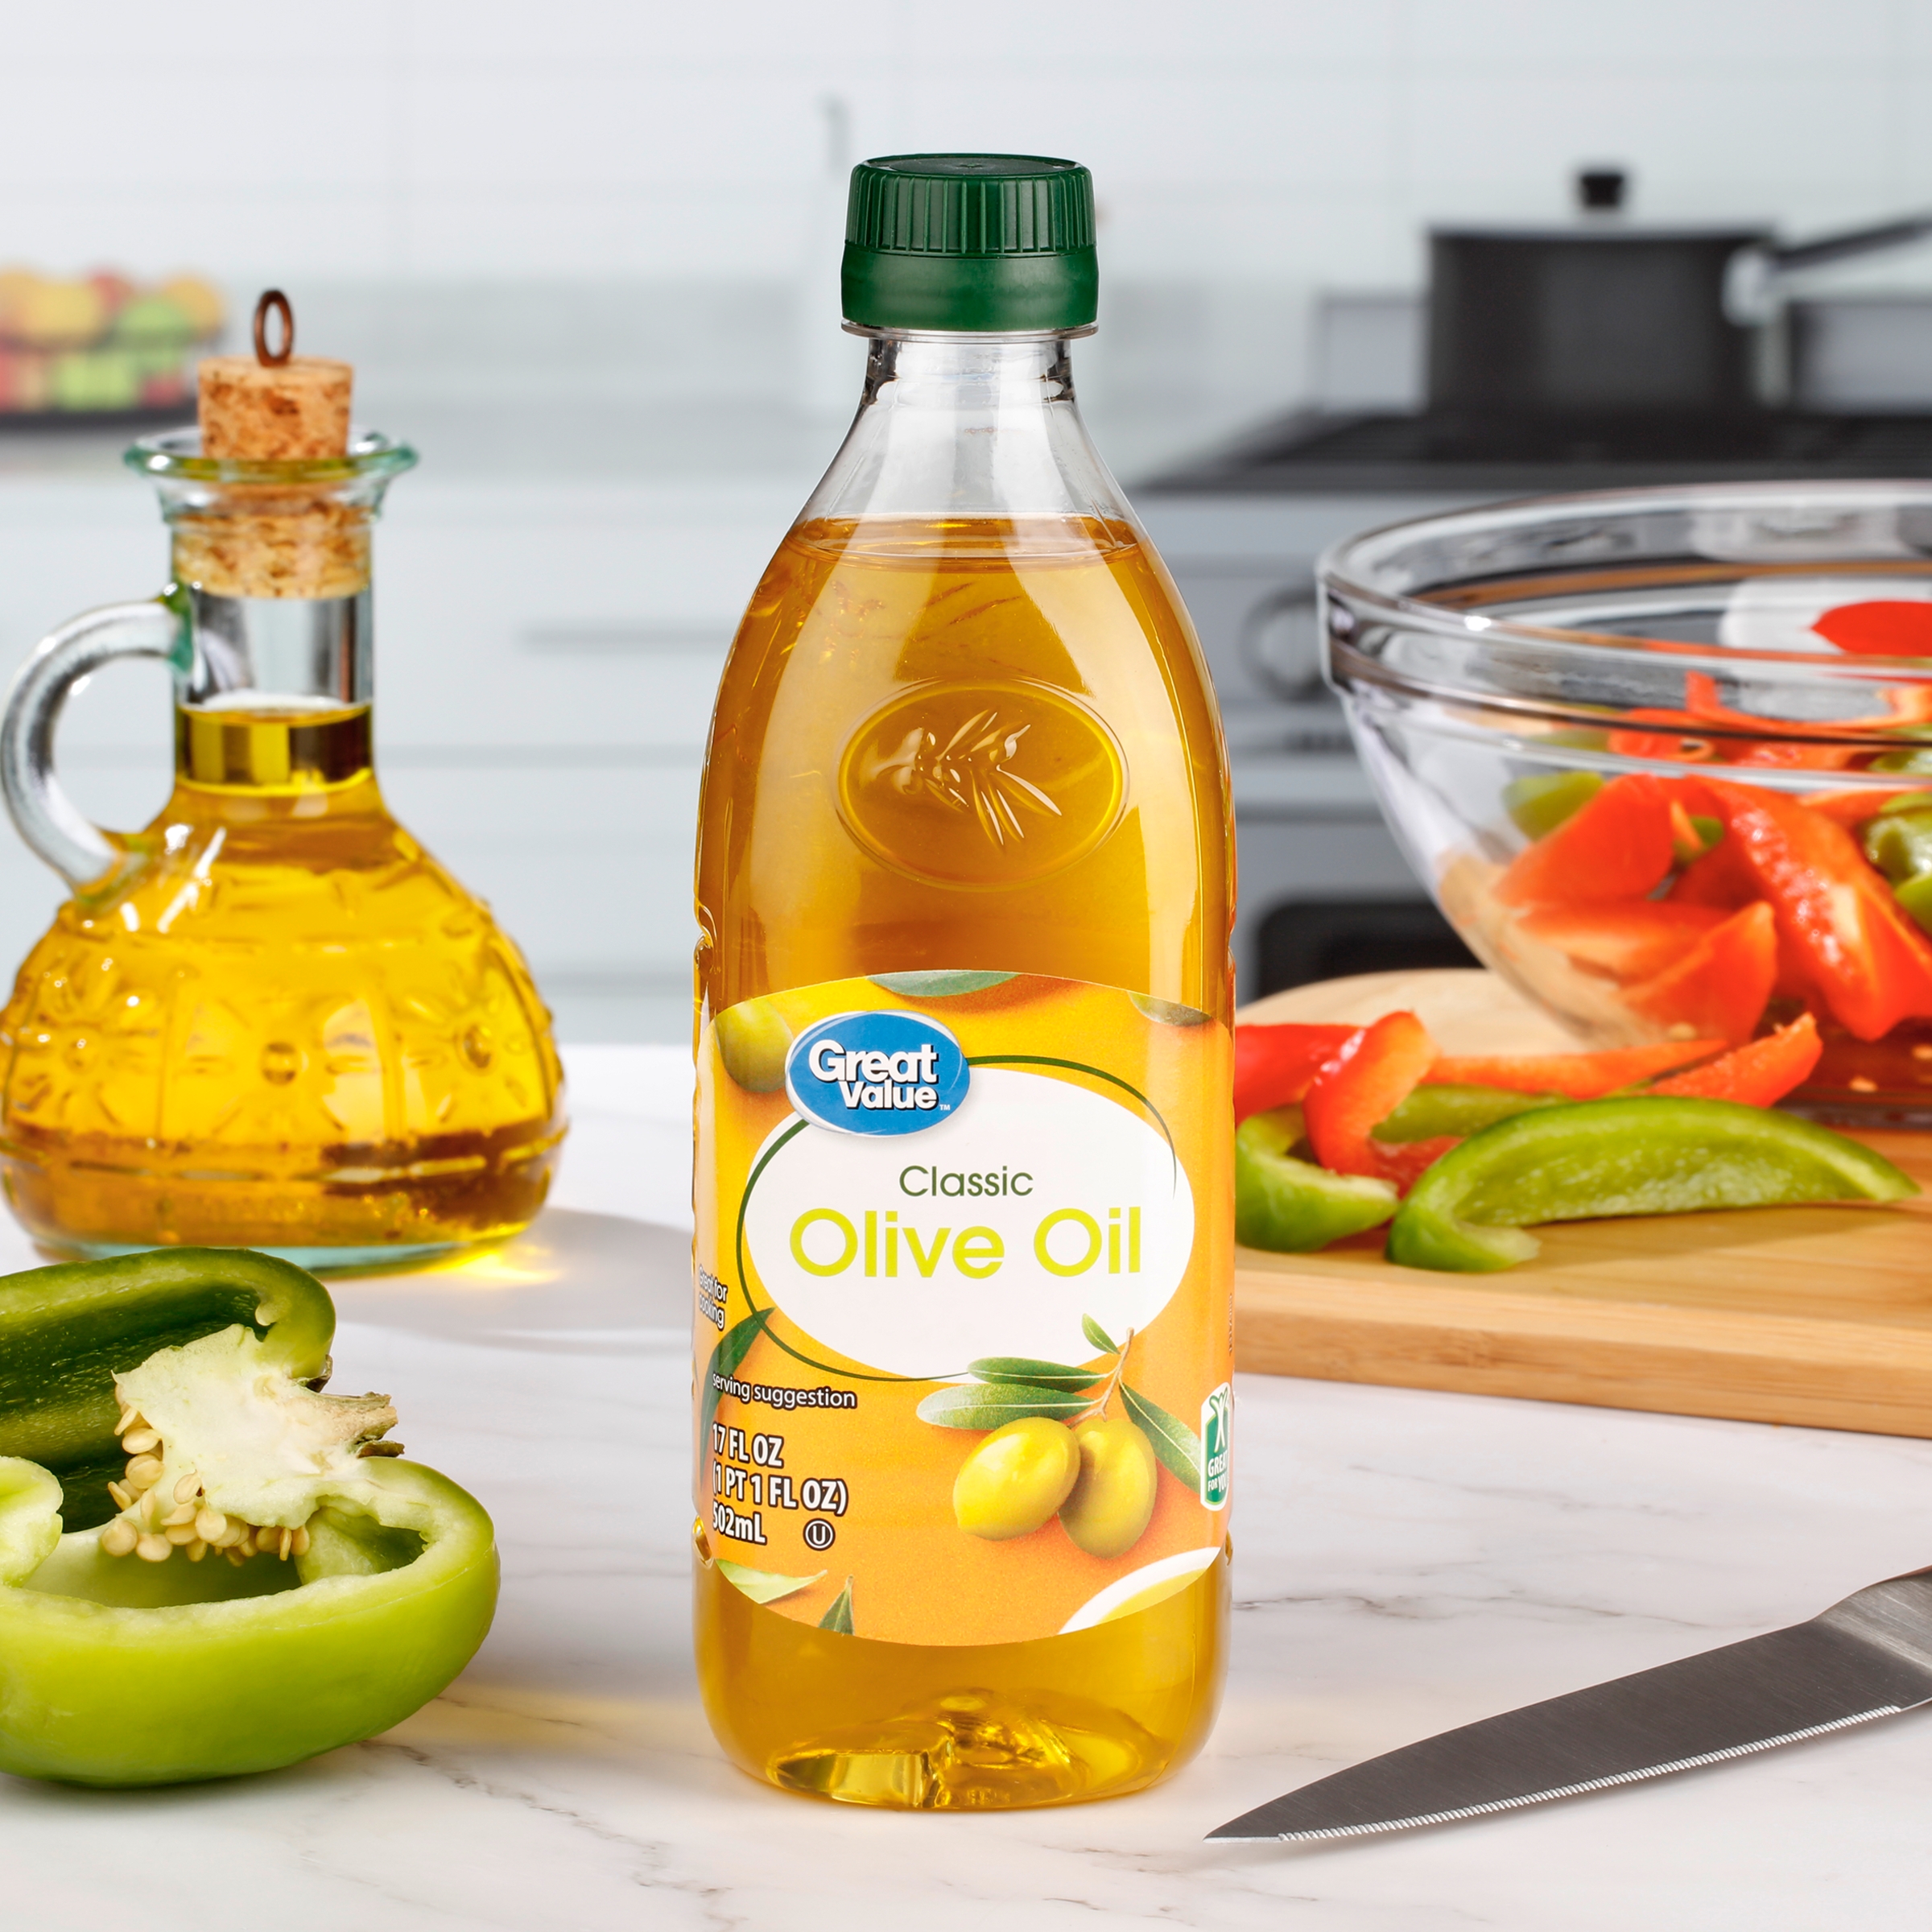 Great Value Classic Olive Oil, 17 fl oz - image 2 of 7